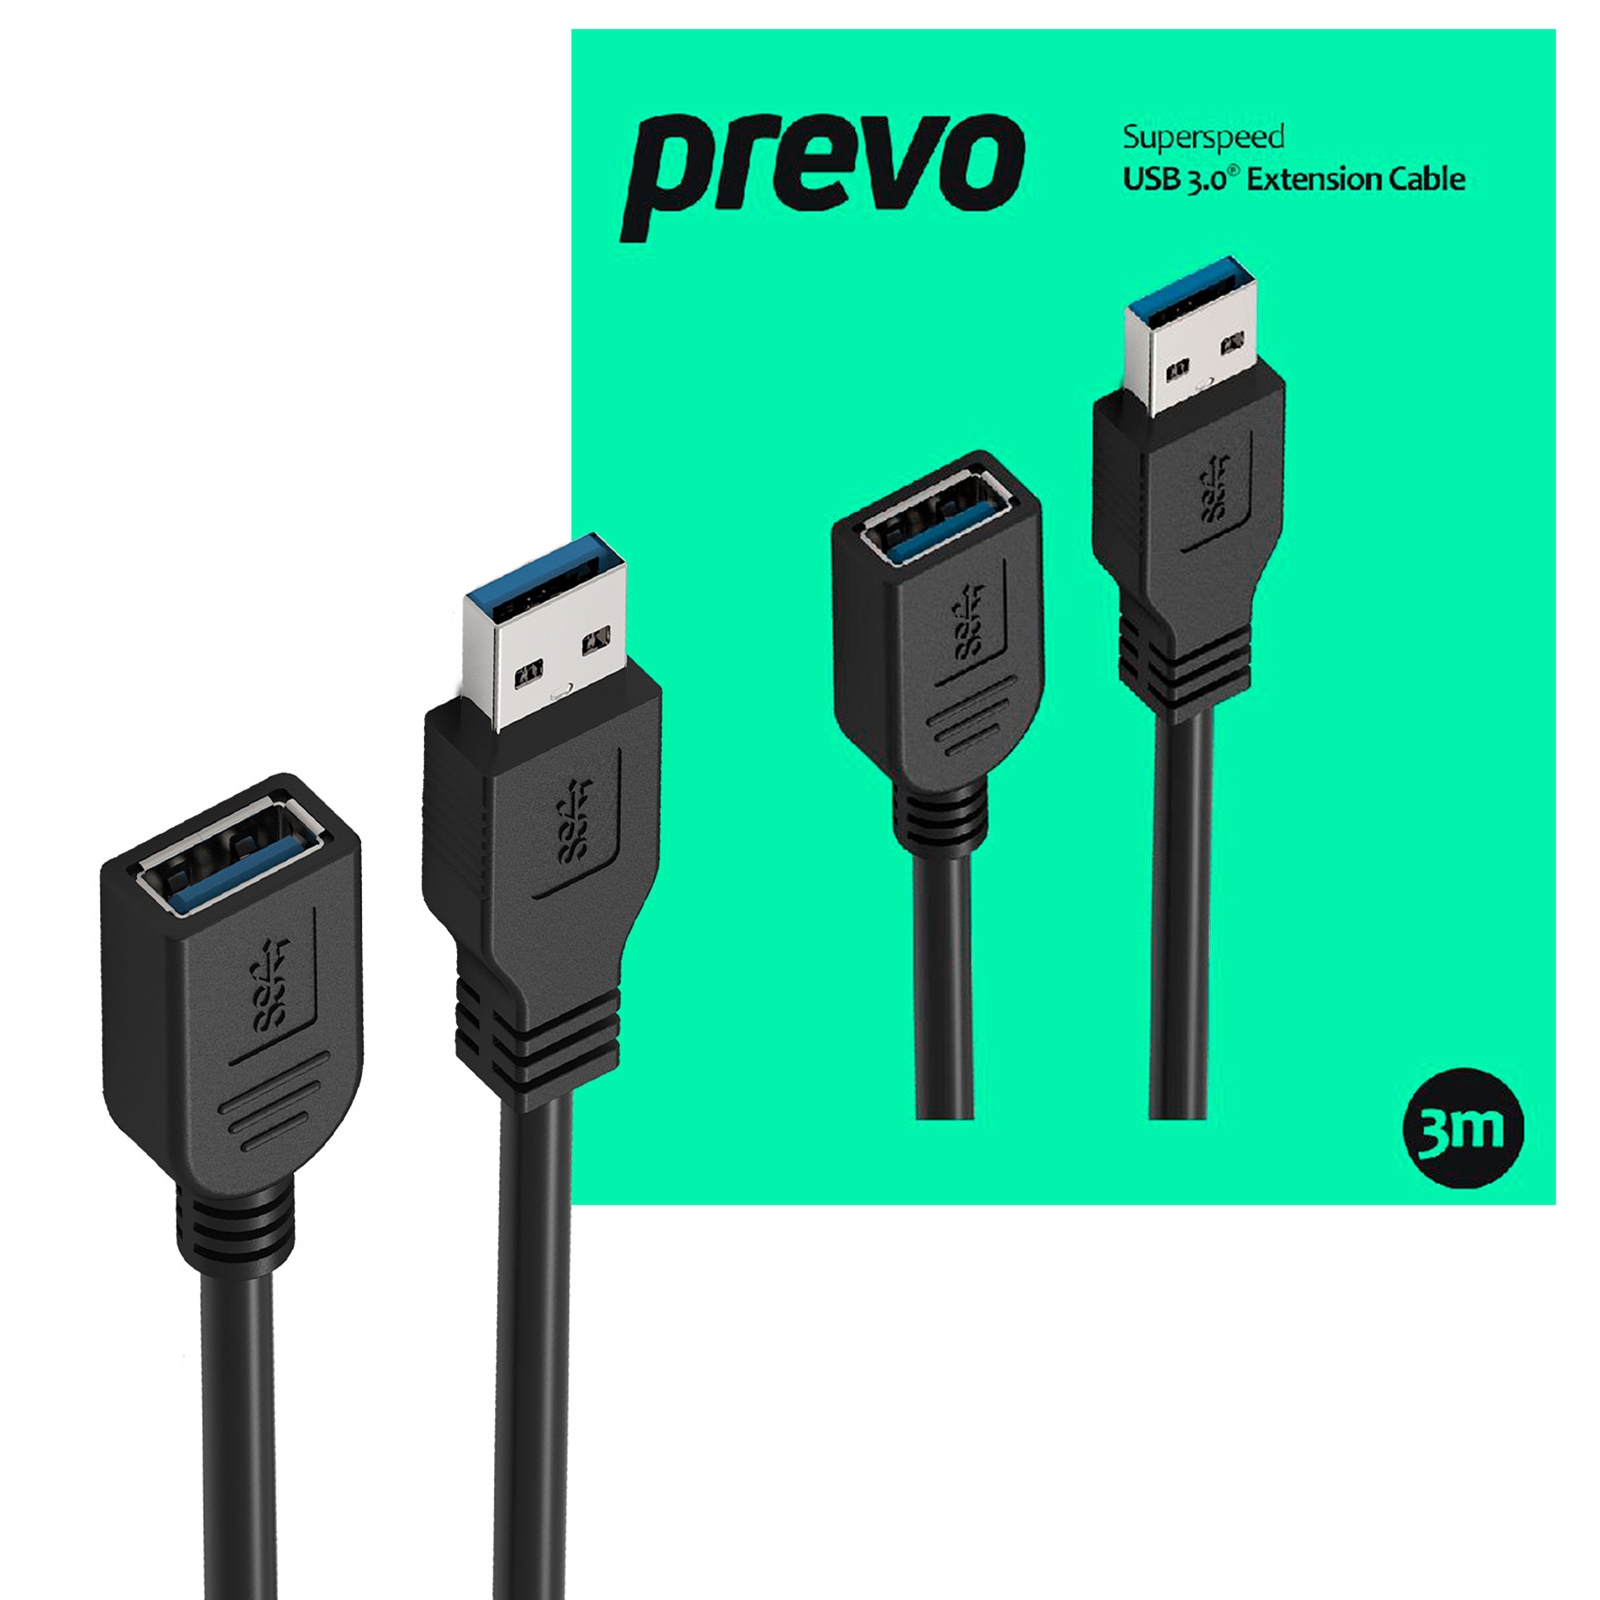 Prevo USBM-USBF-5M USB 3.0 Extension Cable, USB 3.0 Type-A (M) to USB Type-A (F), 5m, Black, Up to 5Gbps Transmission Rate, Retail Box Packaging